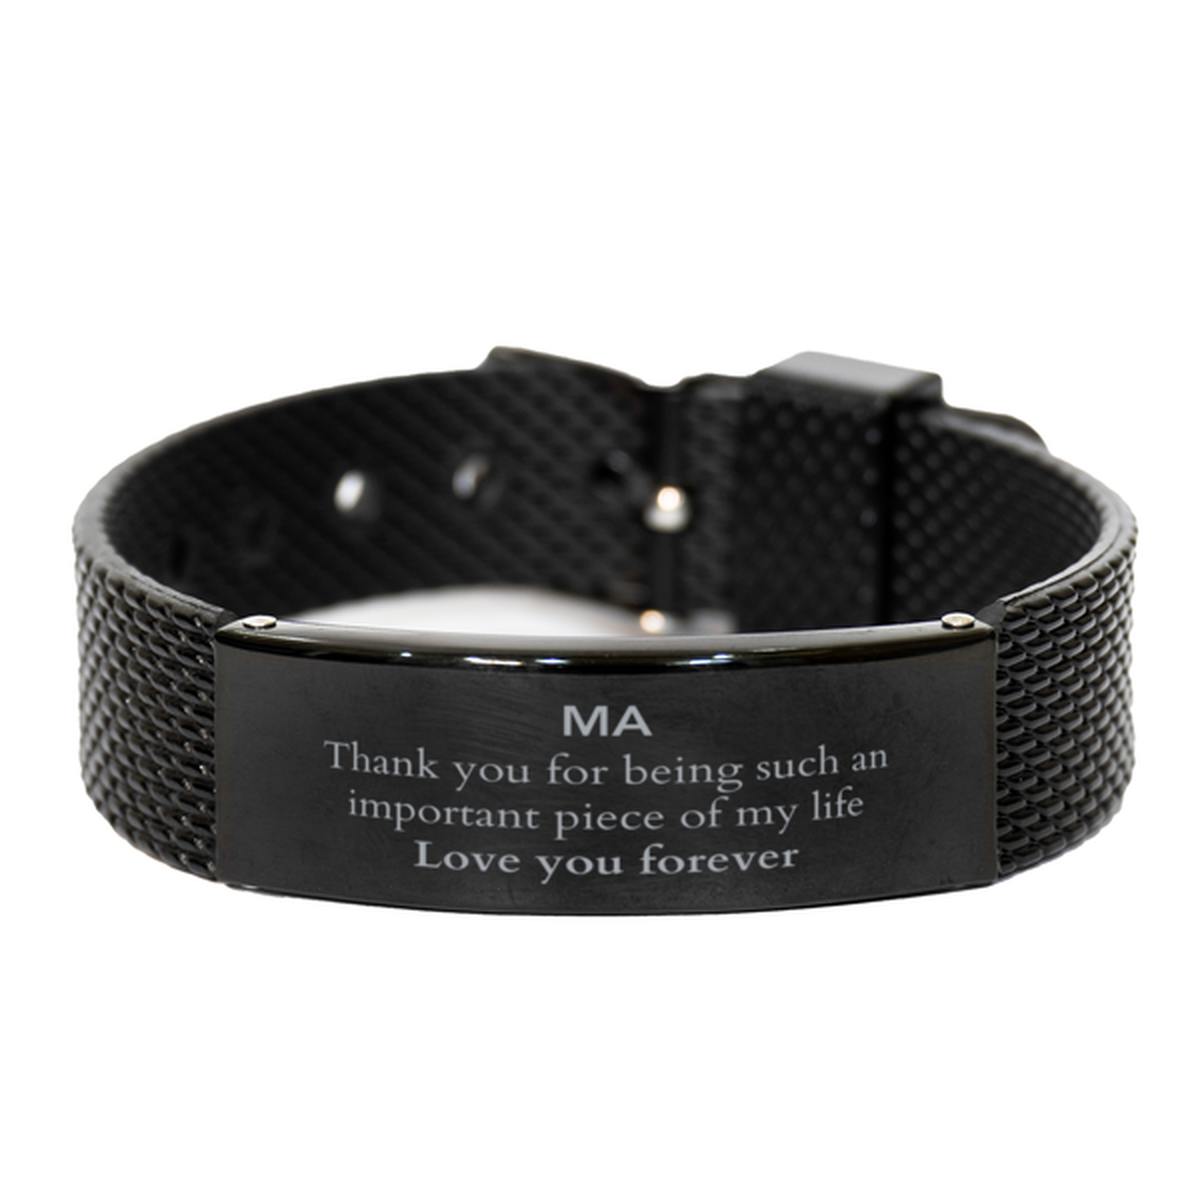 Appropriate Ma Black Shark Mesh Bracelet Epic Birthday Gifts for Ma Thank you for being such an important piece of my life Ma Christmas Mothers Fathers Day